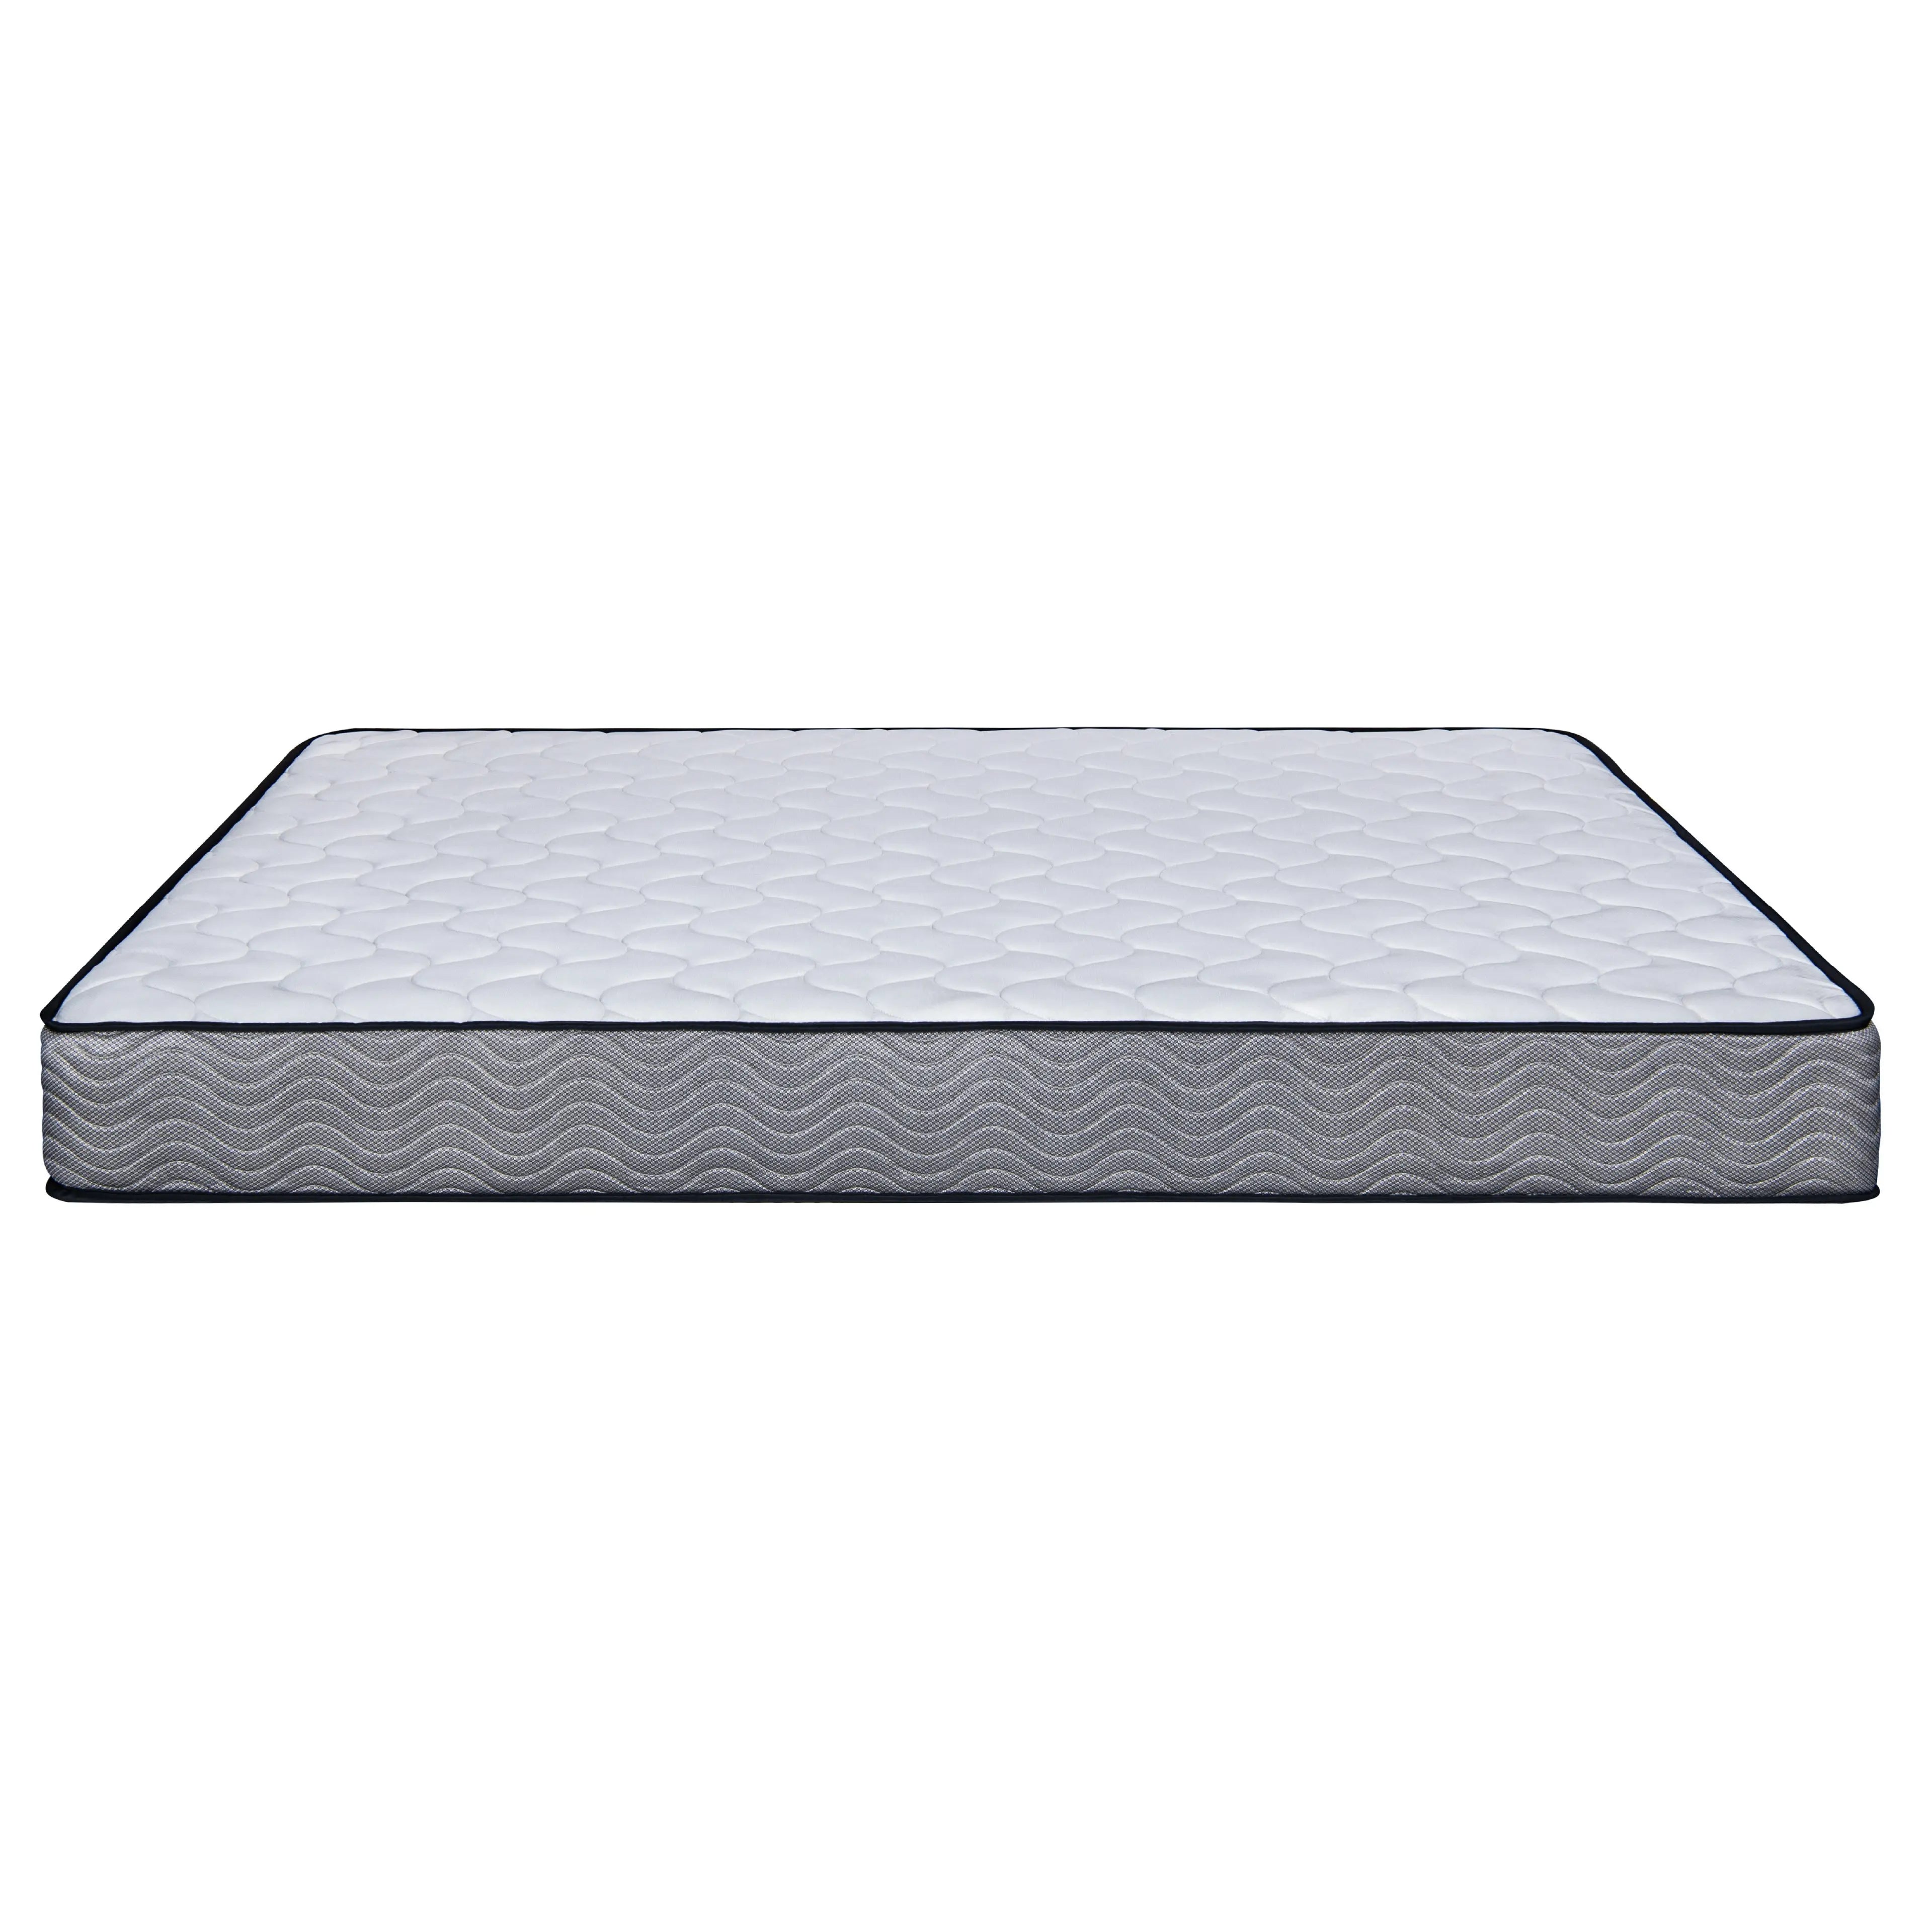 ValueSleeper 3-Zone Orthopaedic Pocket Spring Double Mattress from Deals499 at Deals499